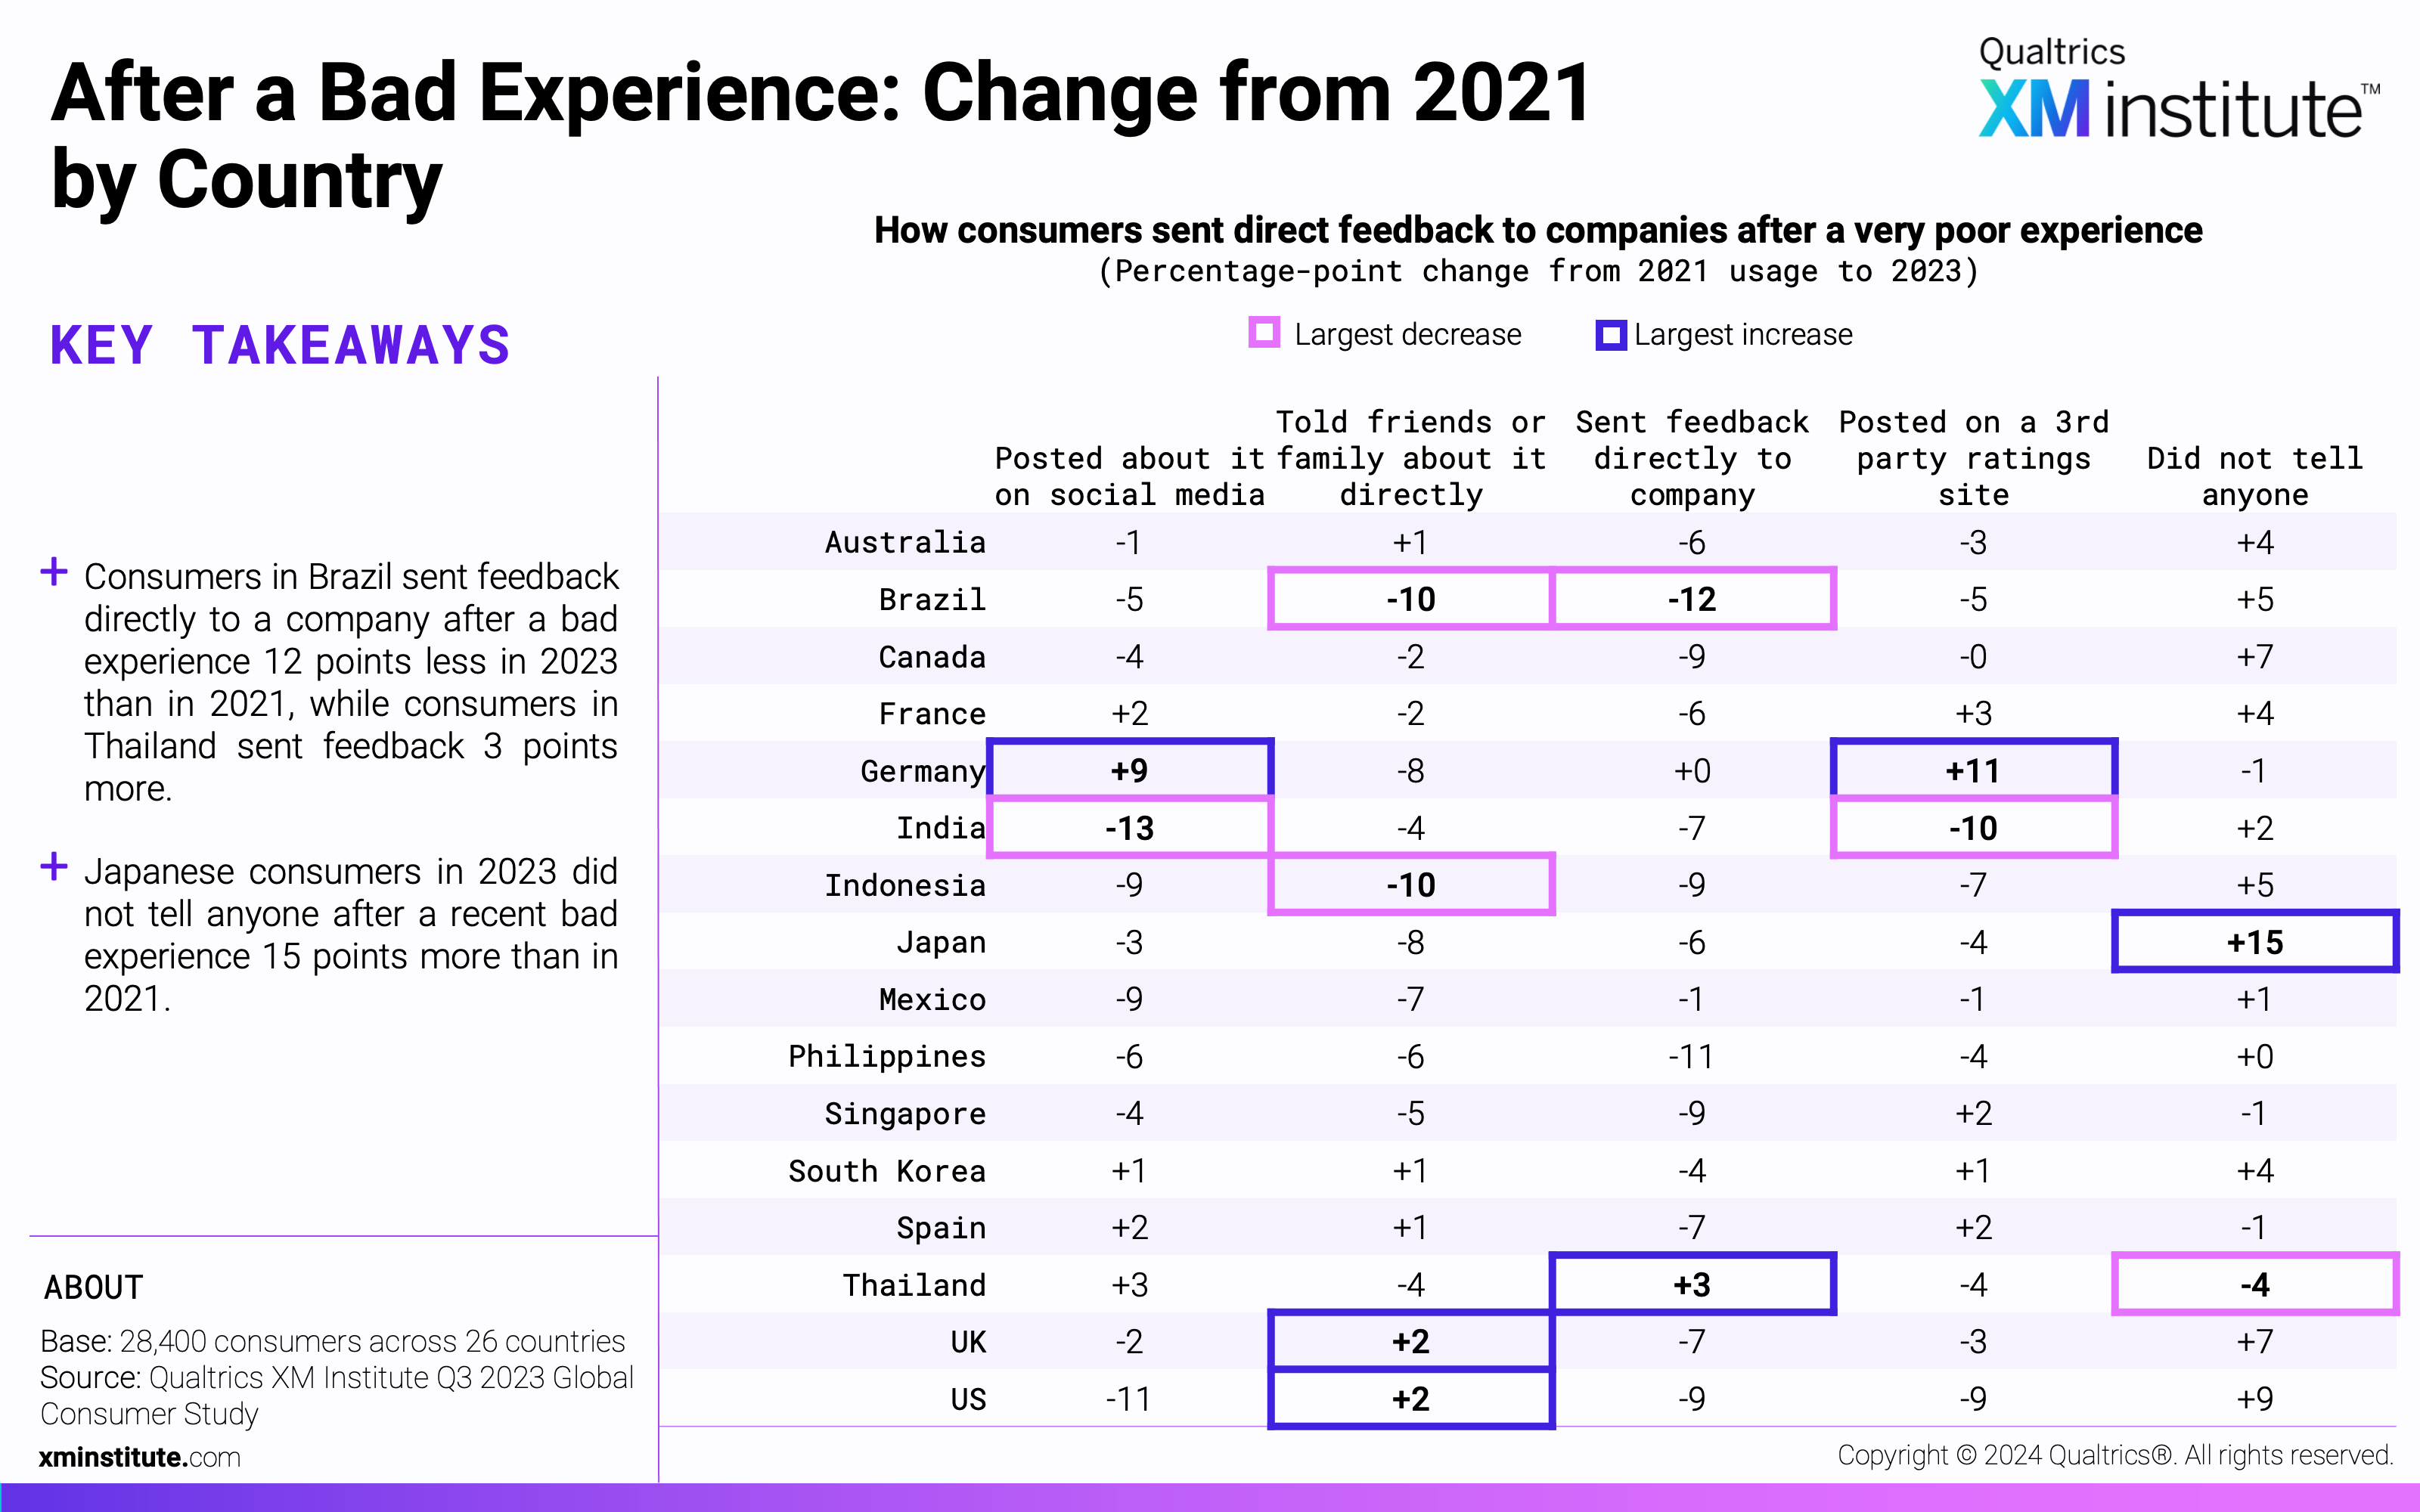 This table shows the percentage-point change in how consumers shared feedback after a very bad experience in 2024 compare to 2021. 